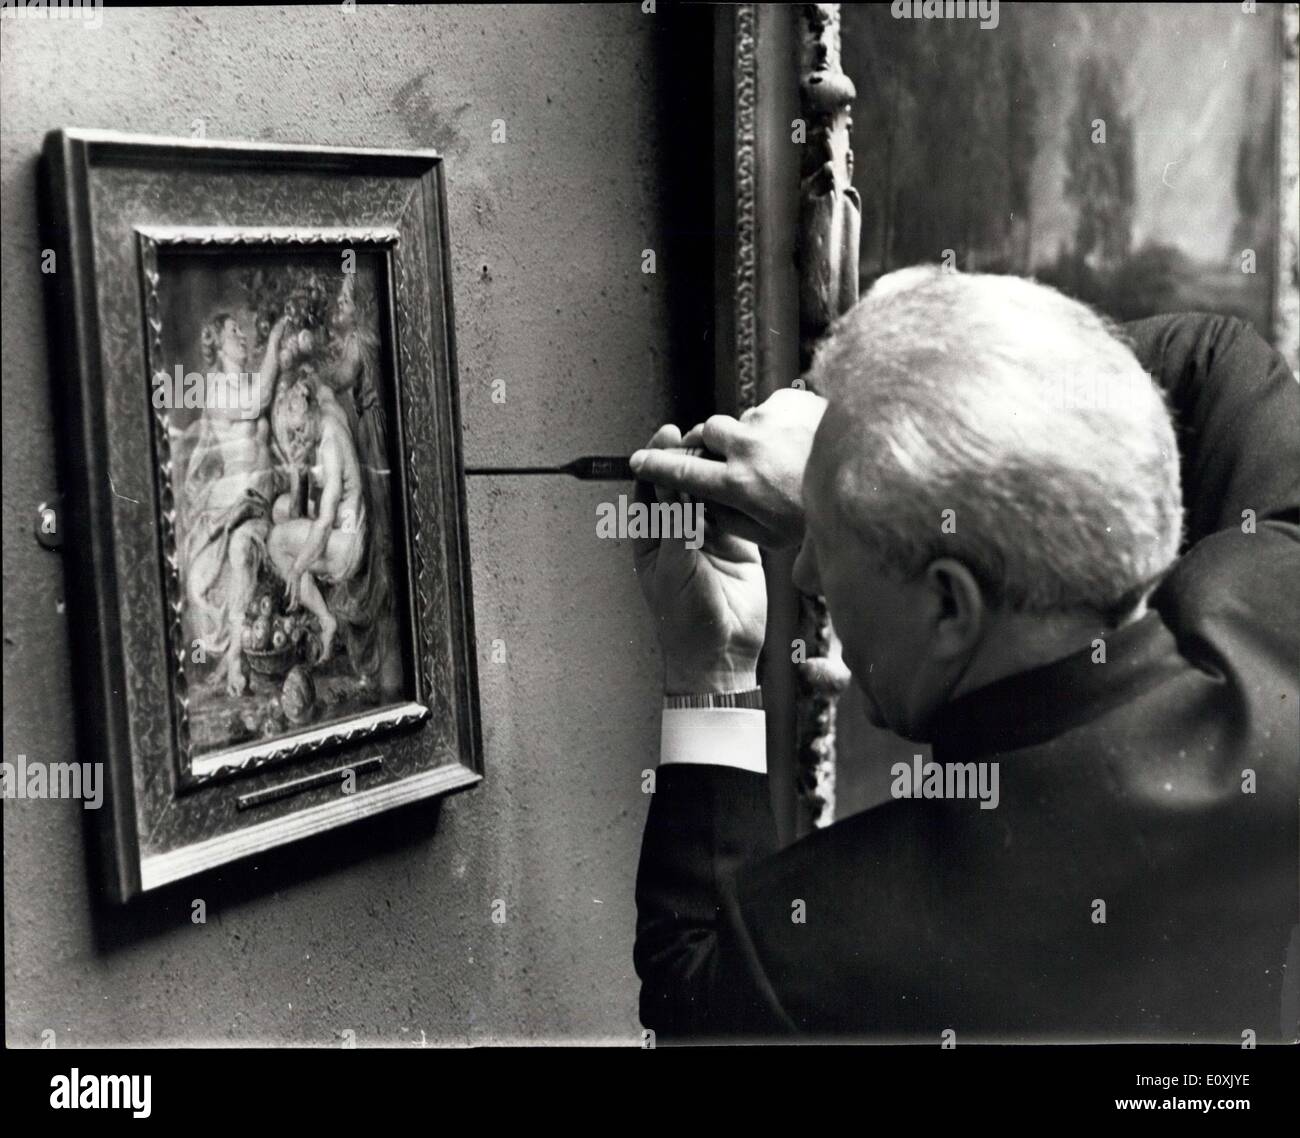 Mar. 03, 1967 - Stolen' Painting on view. Private View of Dulwich College Picture Gallery.: At the Dulwich College Picture Gallery today, Sir Gerald Kelly, K.C.V.C., P.P.R.A., presided at a private press view of the eight paintings which were stolen from the Gallery at the end of last year (30th/31st December 1966).. The paintings, valued at between ? 1 and 2 million 3 Rembrandts, 3 Rubens, 1 Elsheimer, 1 Dou - were recovered a few days after the robbery. They did not suffer any serious damage Stock Photo